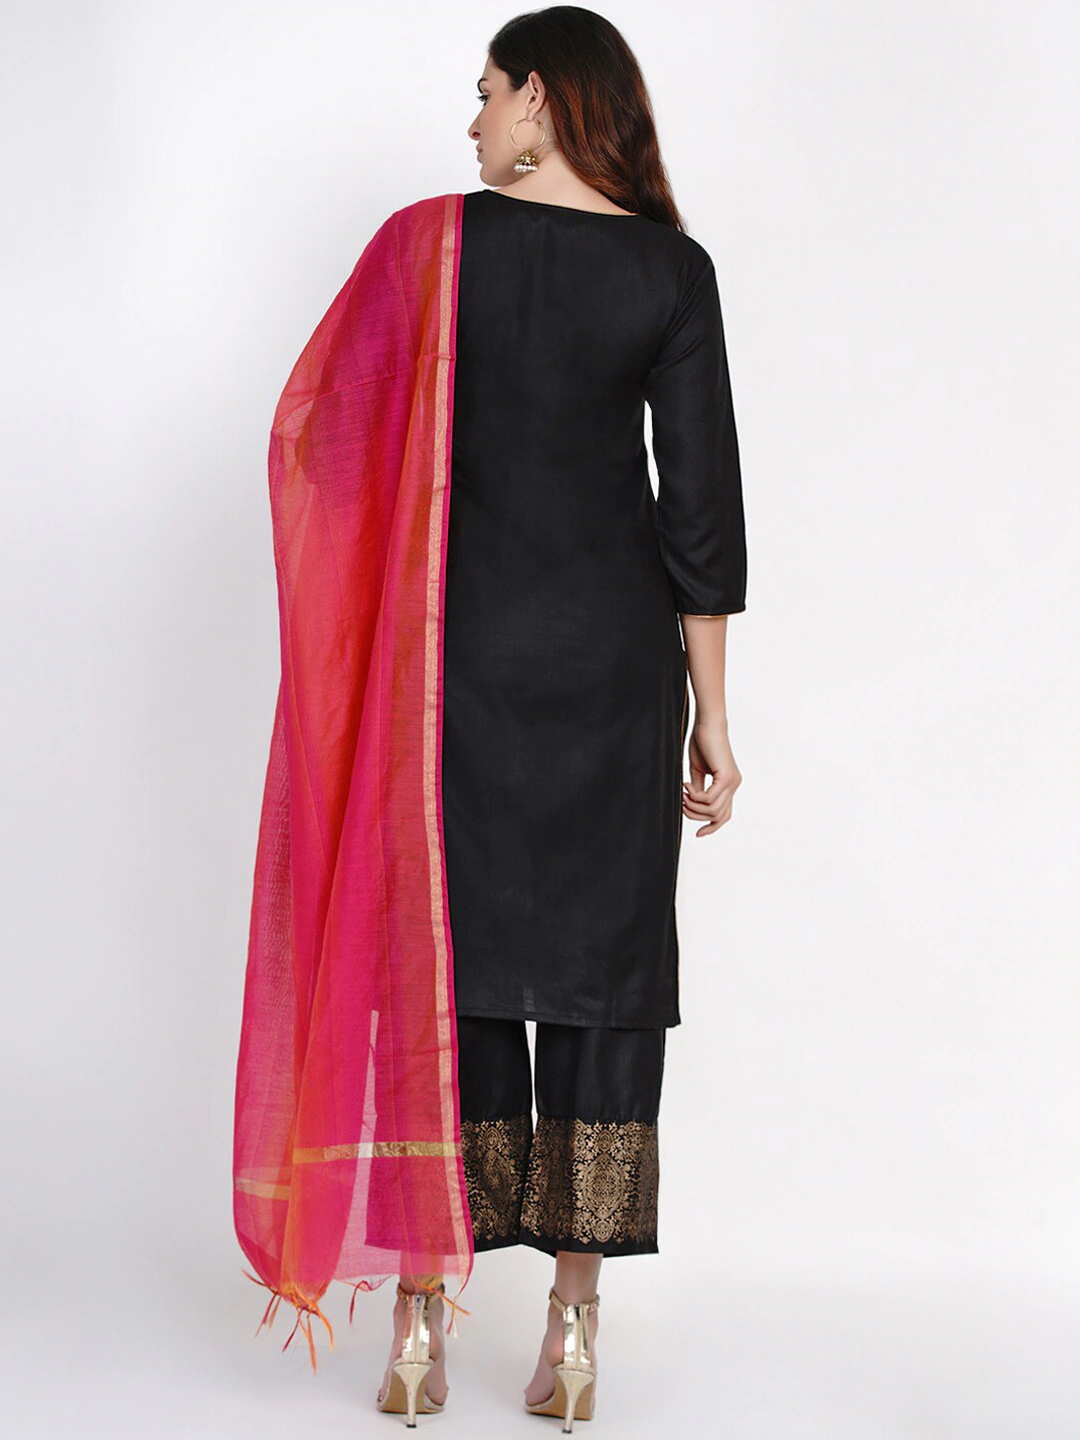 Black And Golden Embroidered Kurta With Palazzos And Dupatta